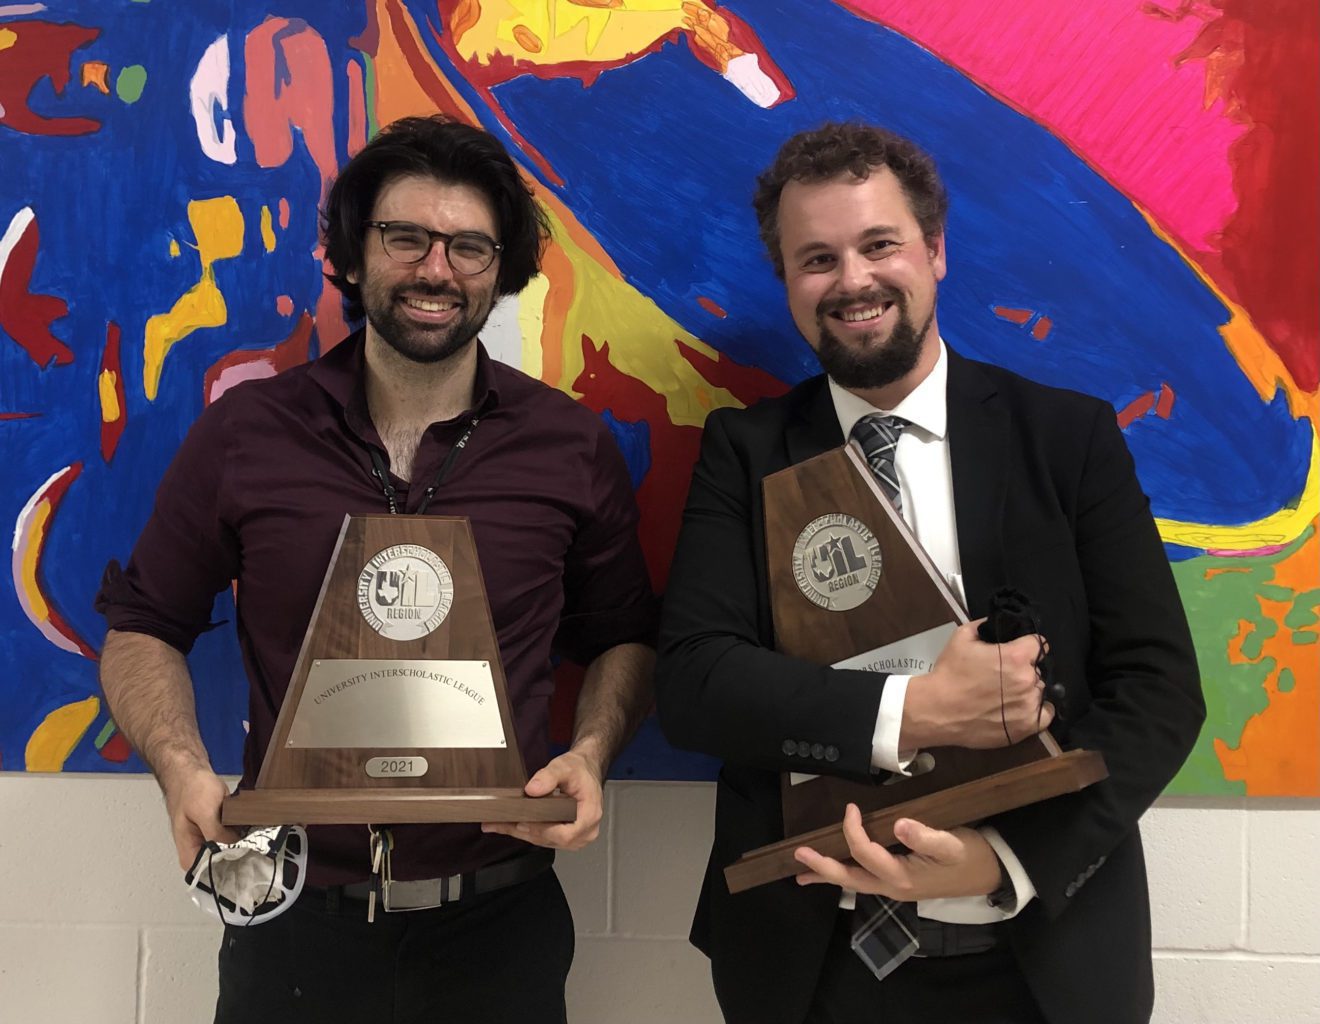 Congratulations to Mr. Misko, Mr. Ruppa, and our High School Wind Ensemble and Symphonic Band students! Way to go Cardinals!!